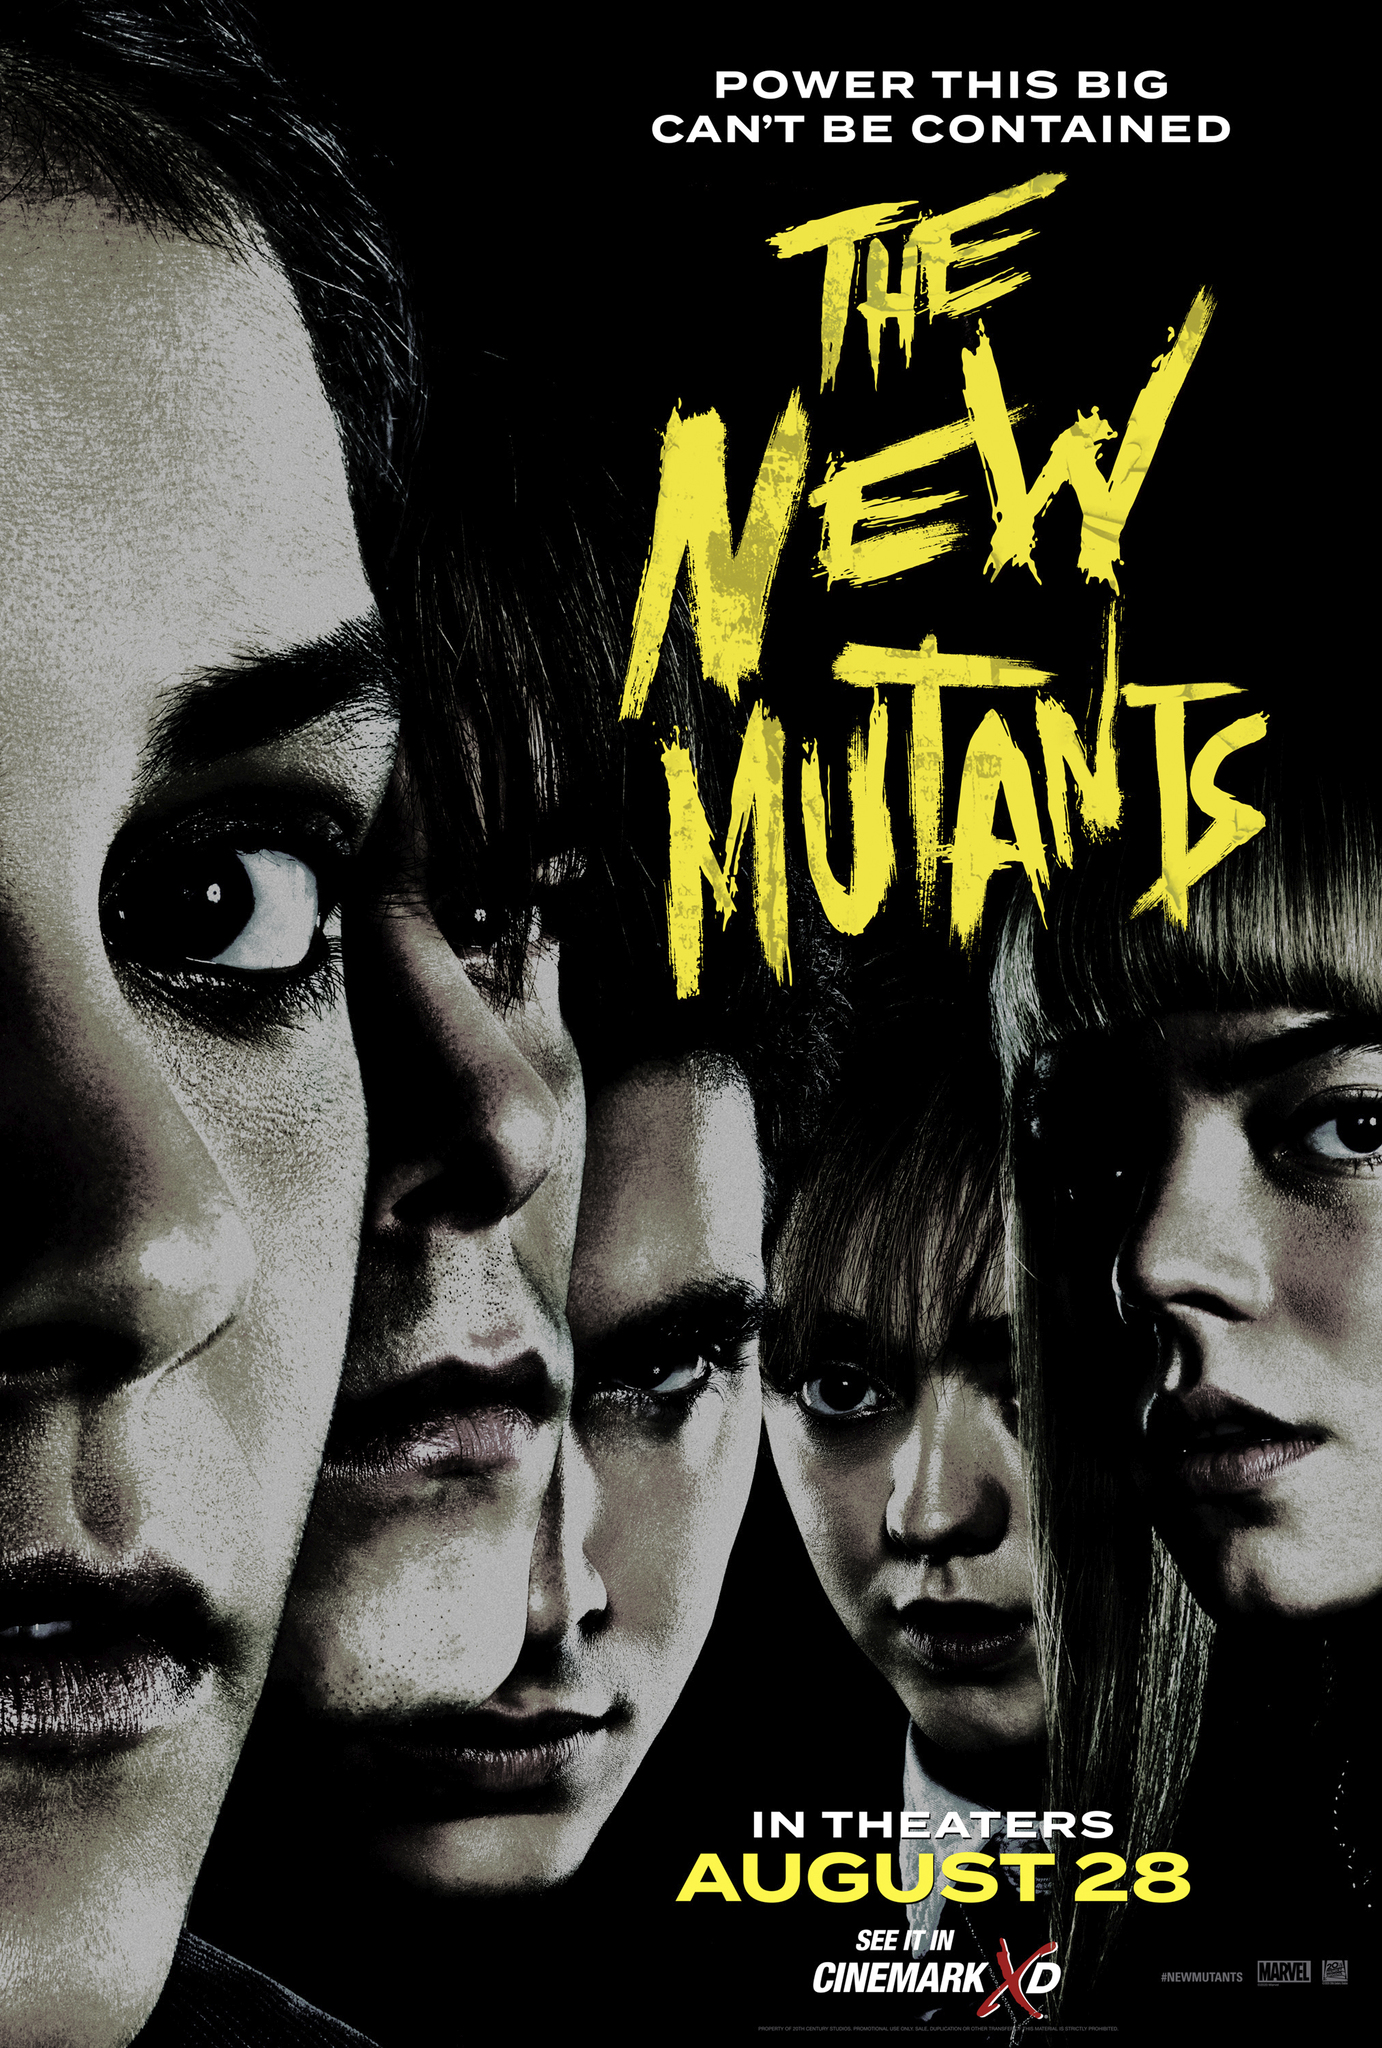 The New Mutants (2020), Film Review